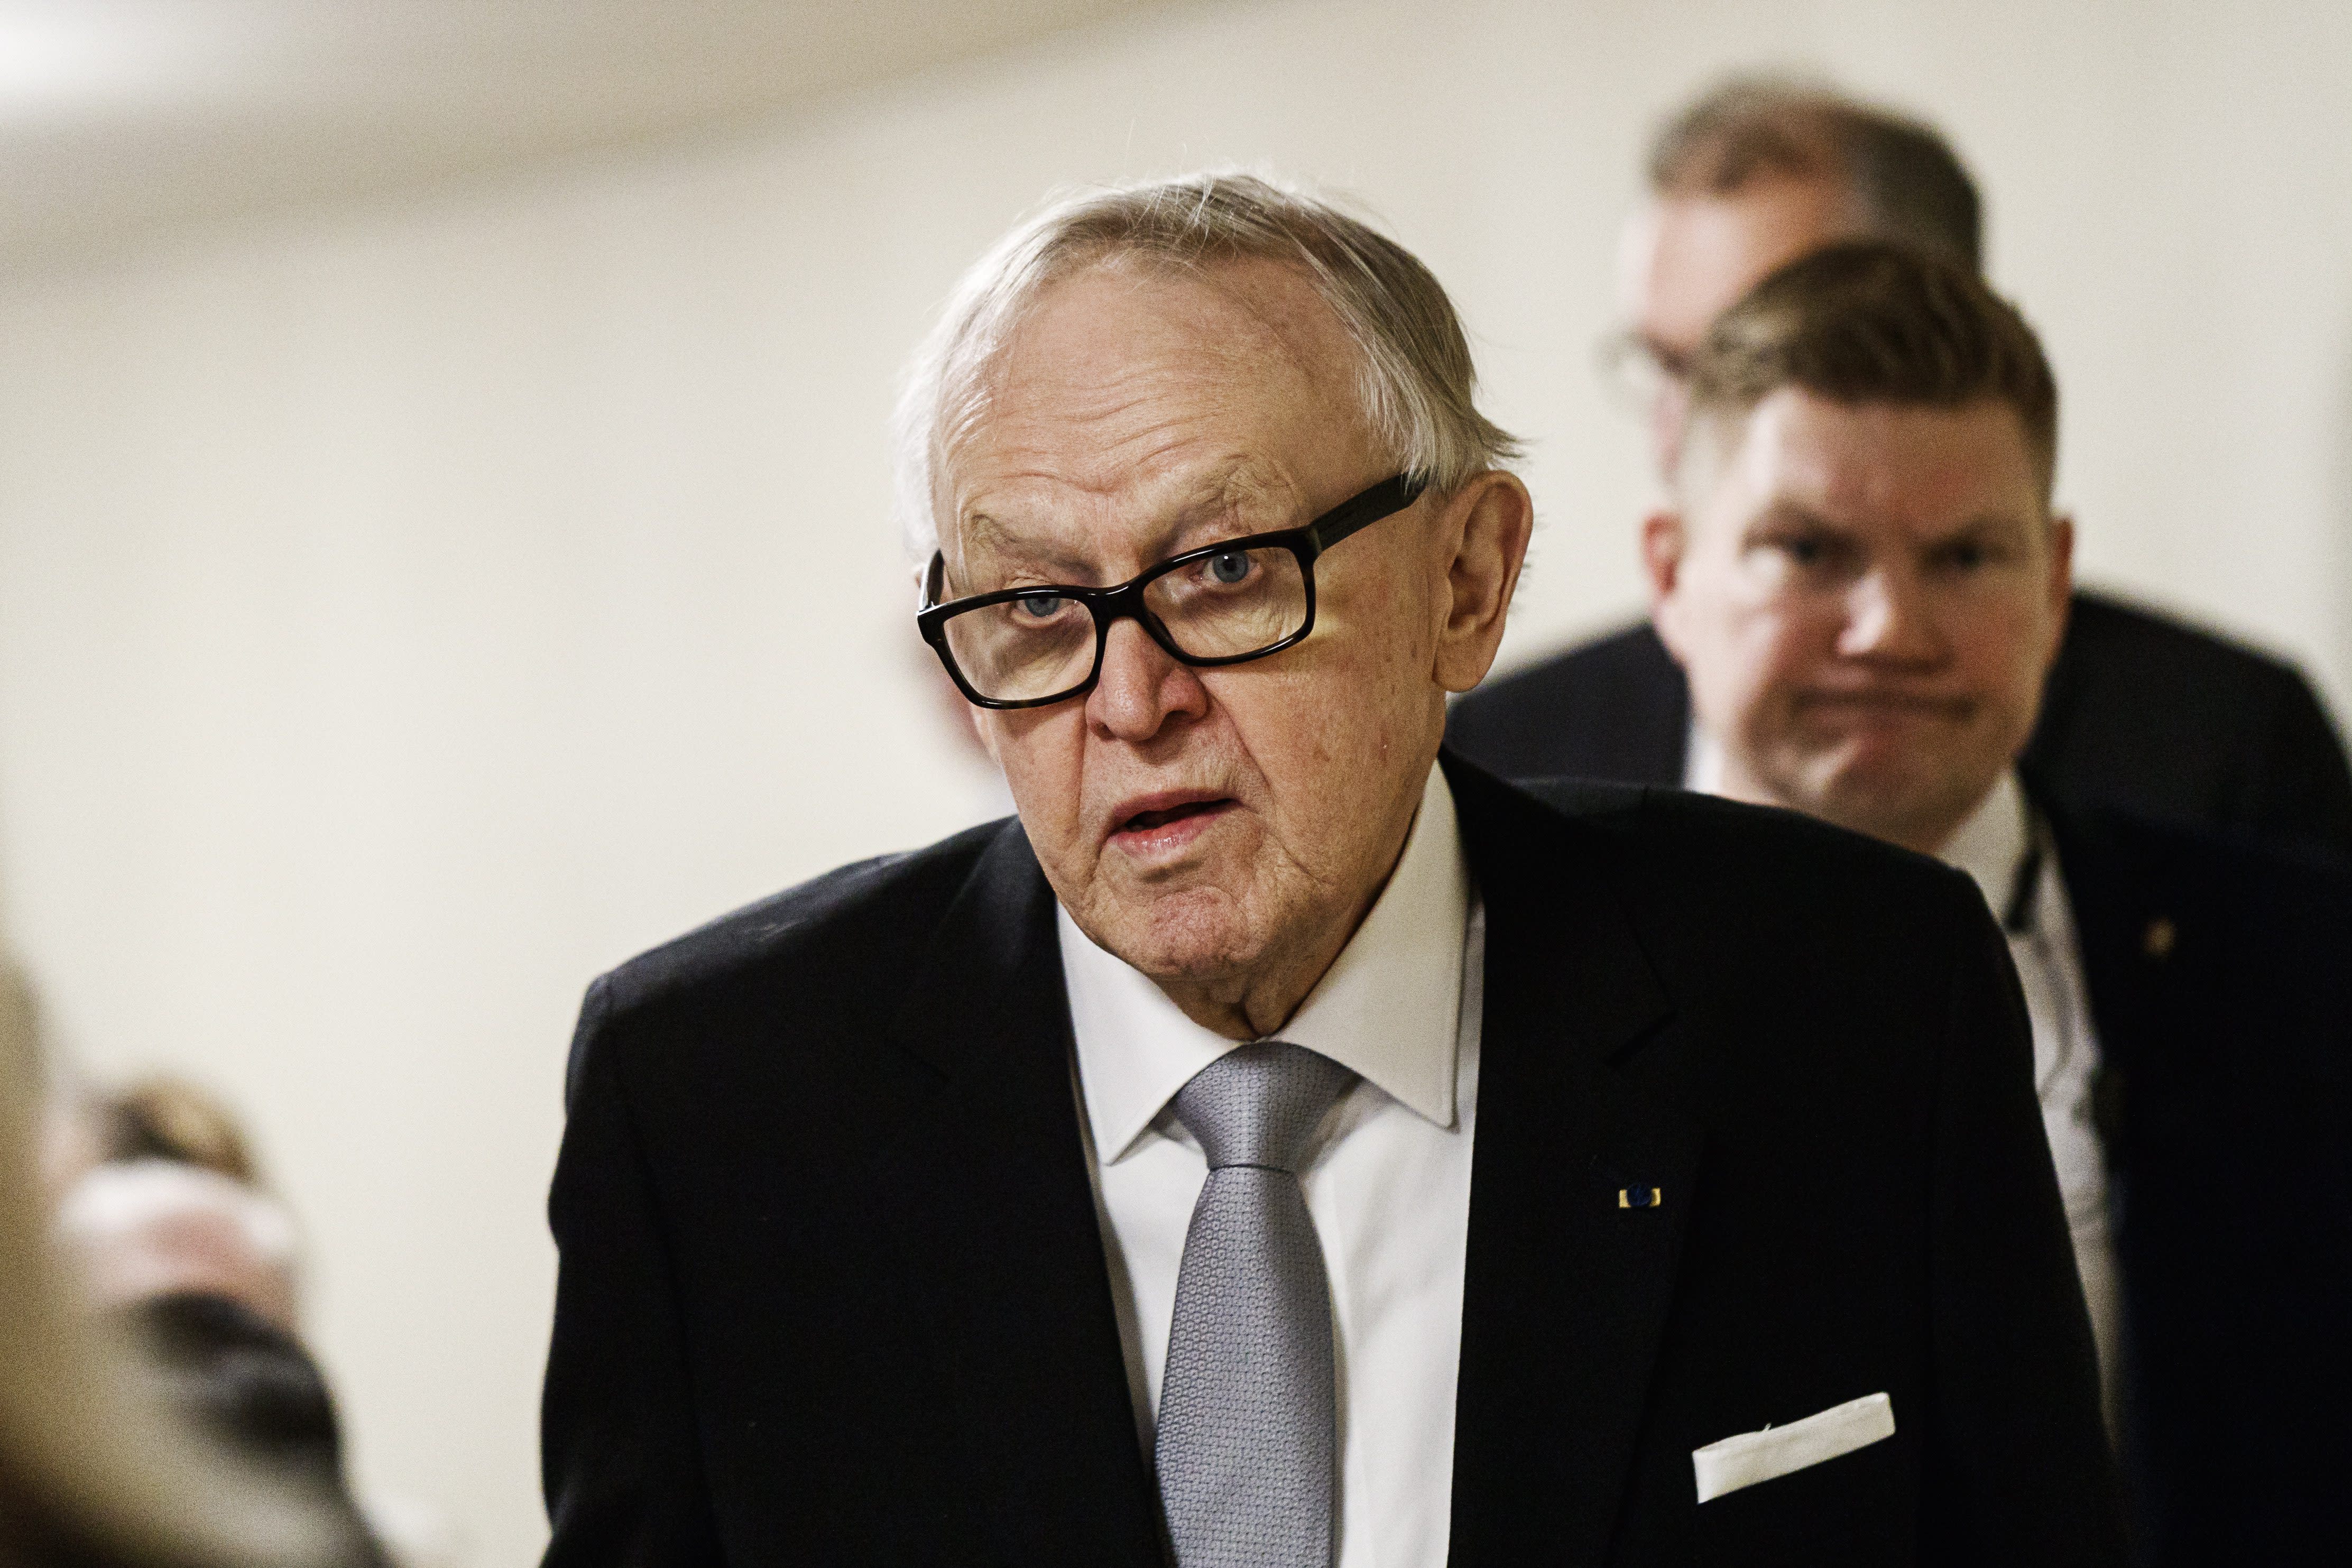 Former President Ahtisaari confirmed another positive Covid diagnosis